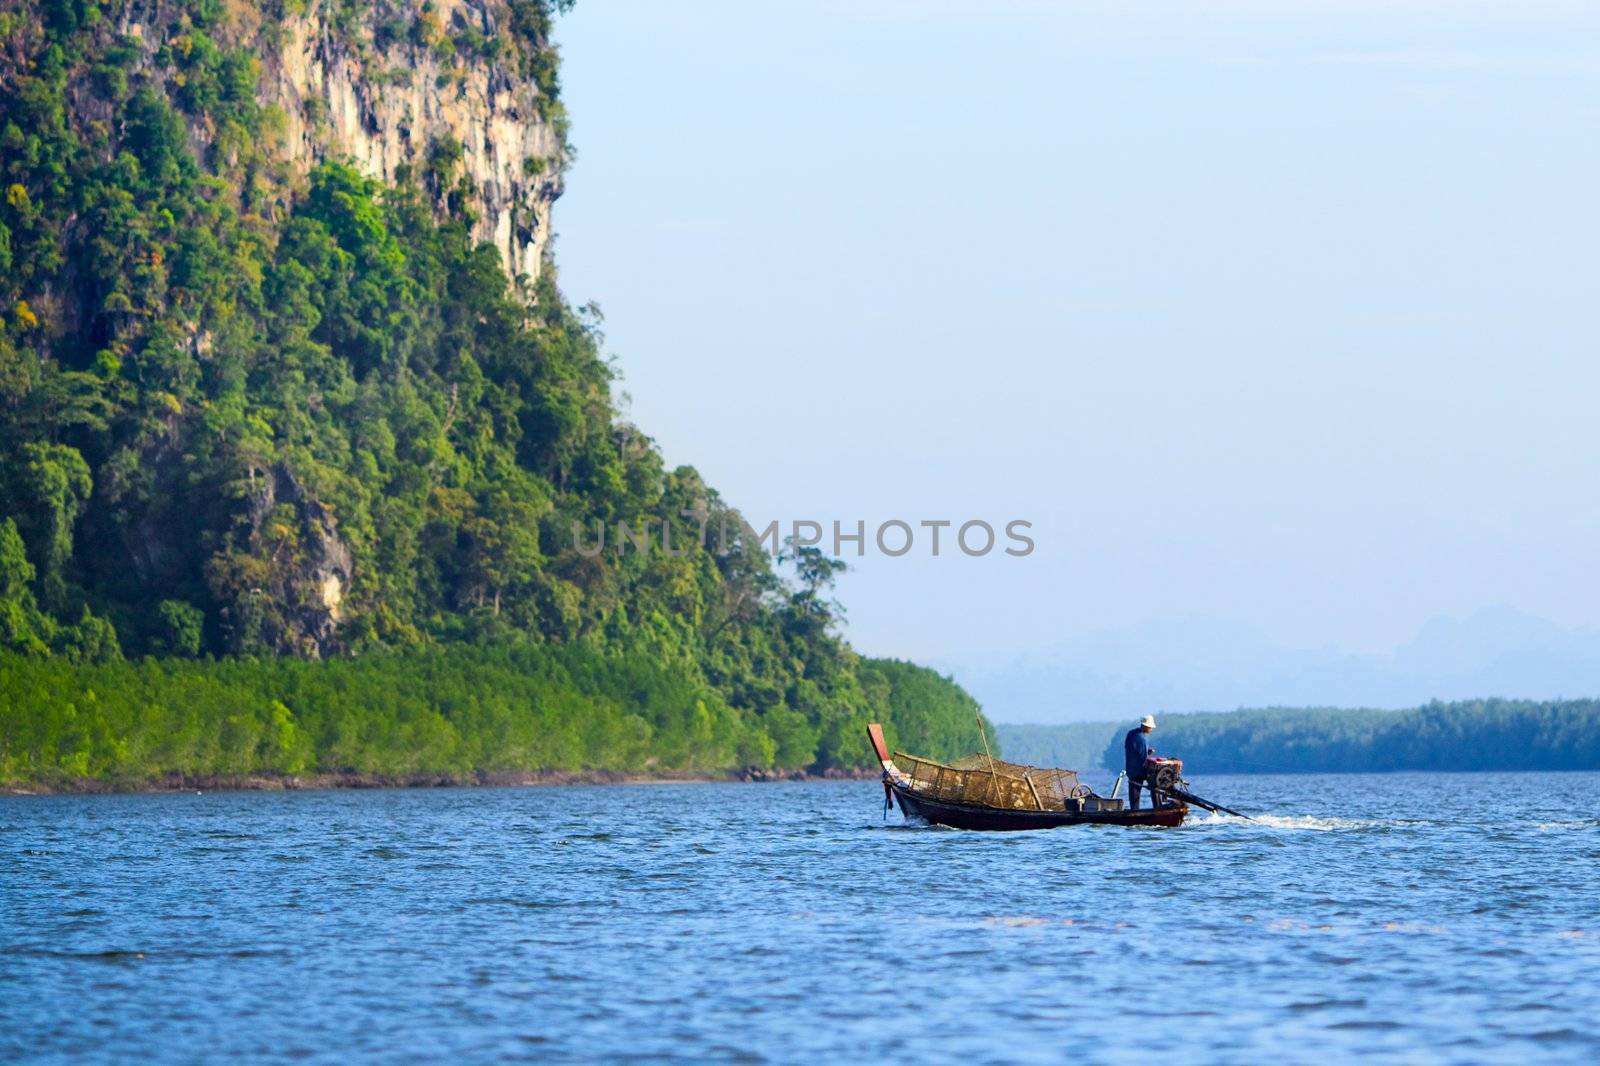 tall cliff in sea and fisherman in boat, Andaman Sea, Thailand